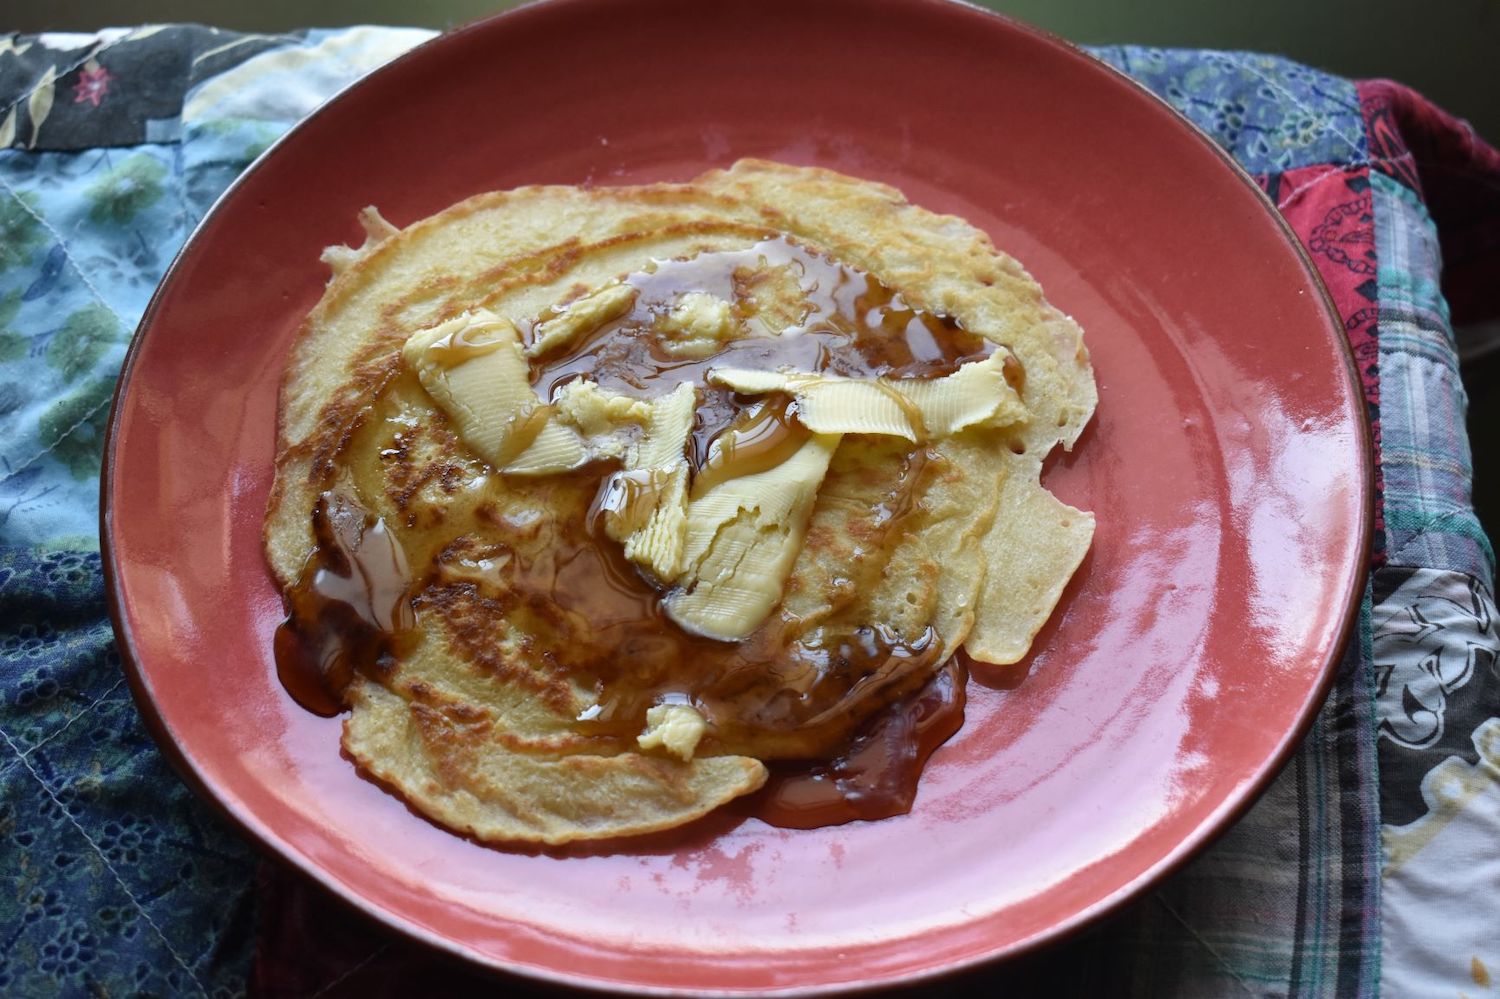 A plate with pancakes. September 2020